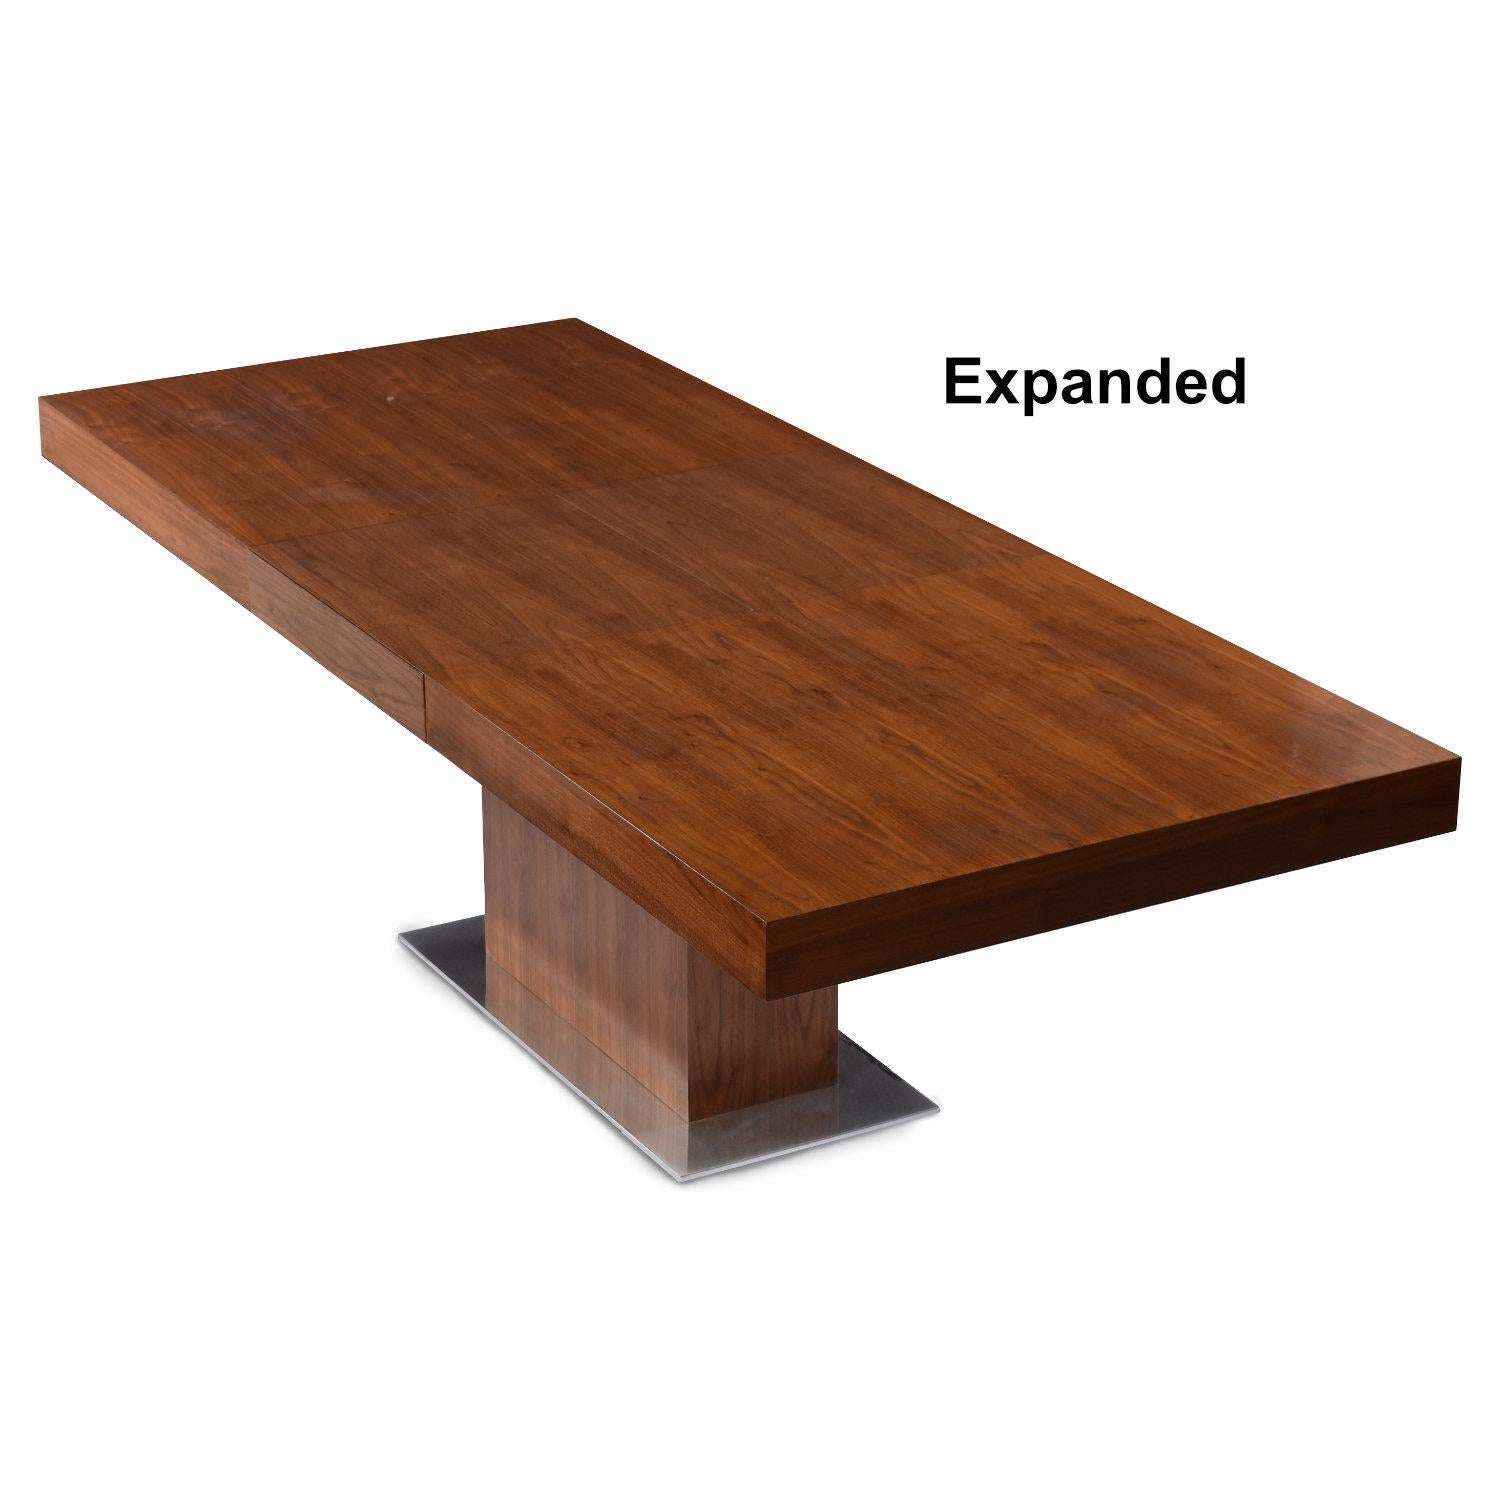 Expanding Modern walnut dining table with self-stowing butterfly leaf at center. This table is ideal for use as a conference table or dining table. The sleek design finds itself at home in a number of settings. The minimalist table has a pedestal